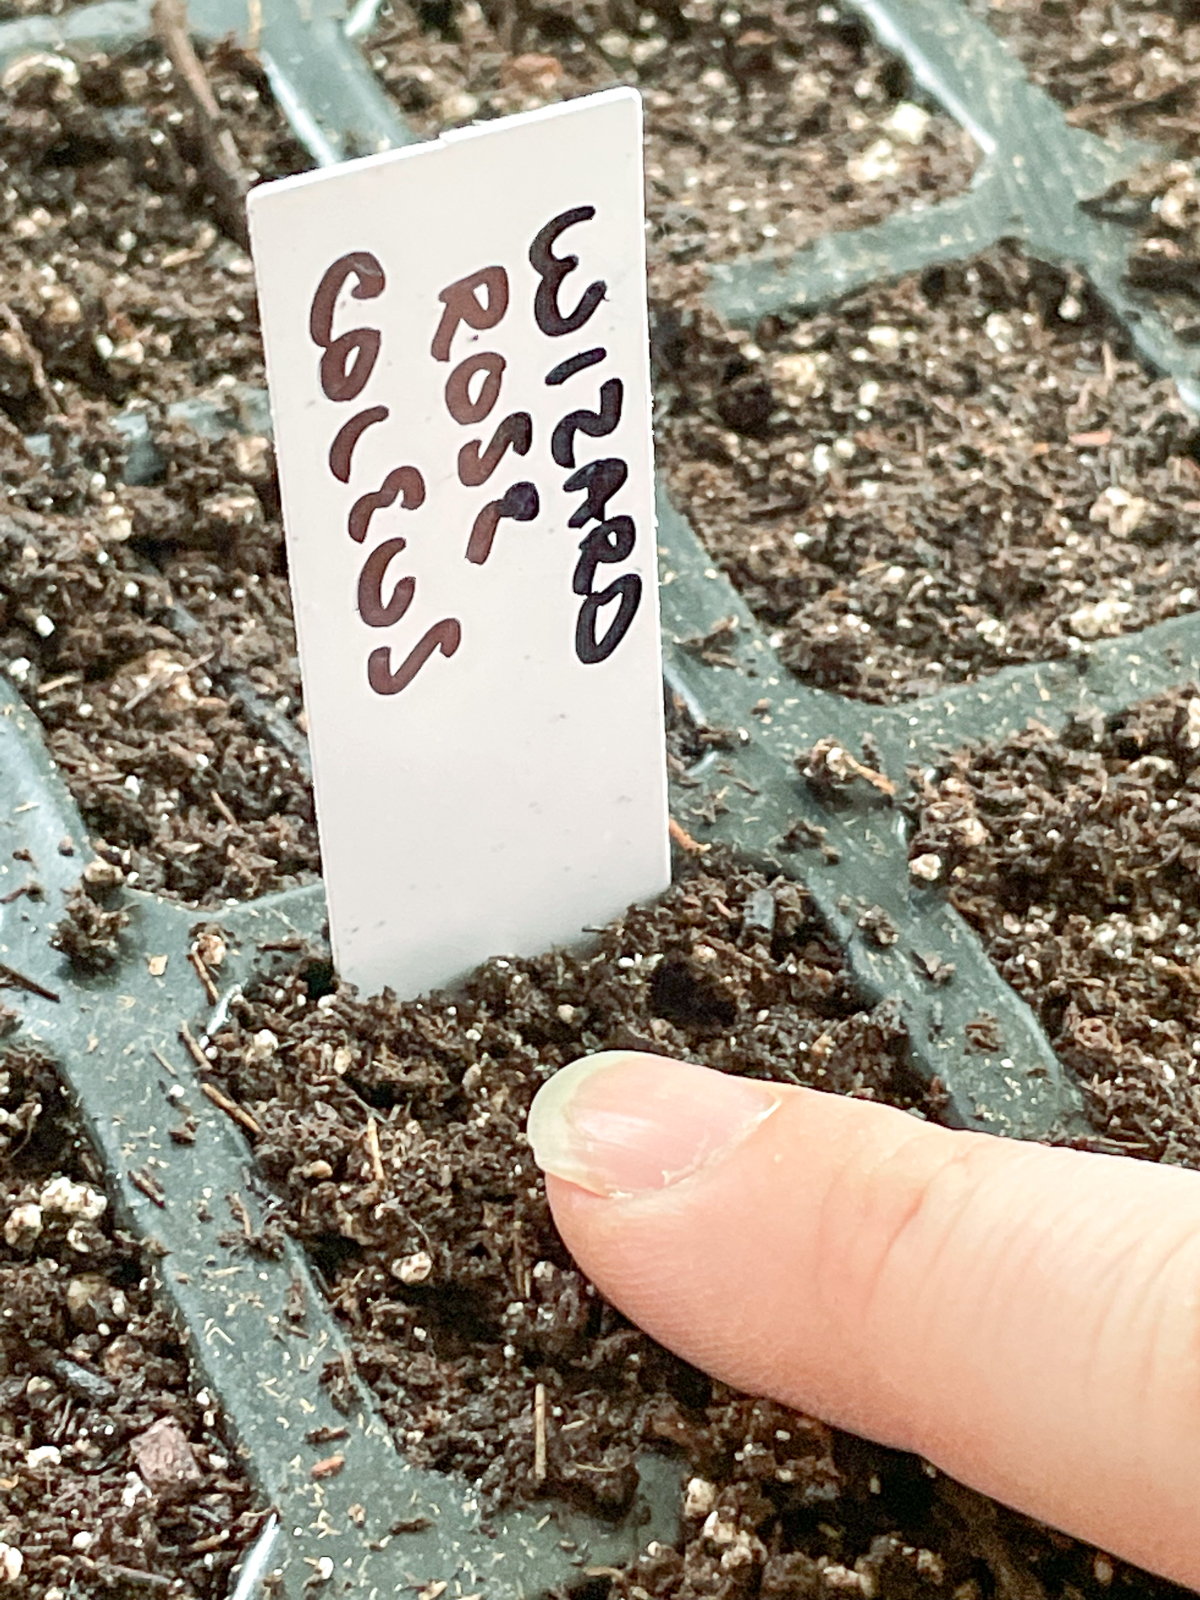 pressing coleus seeds into the soil surface